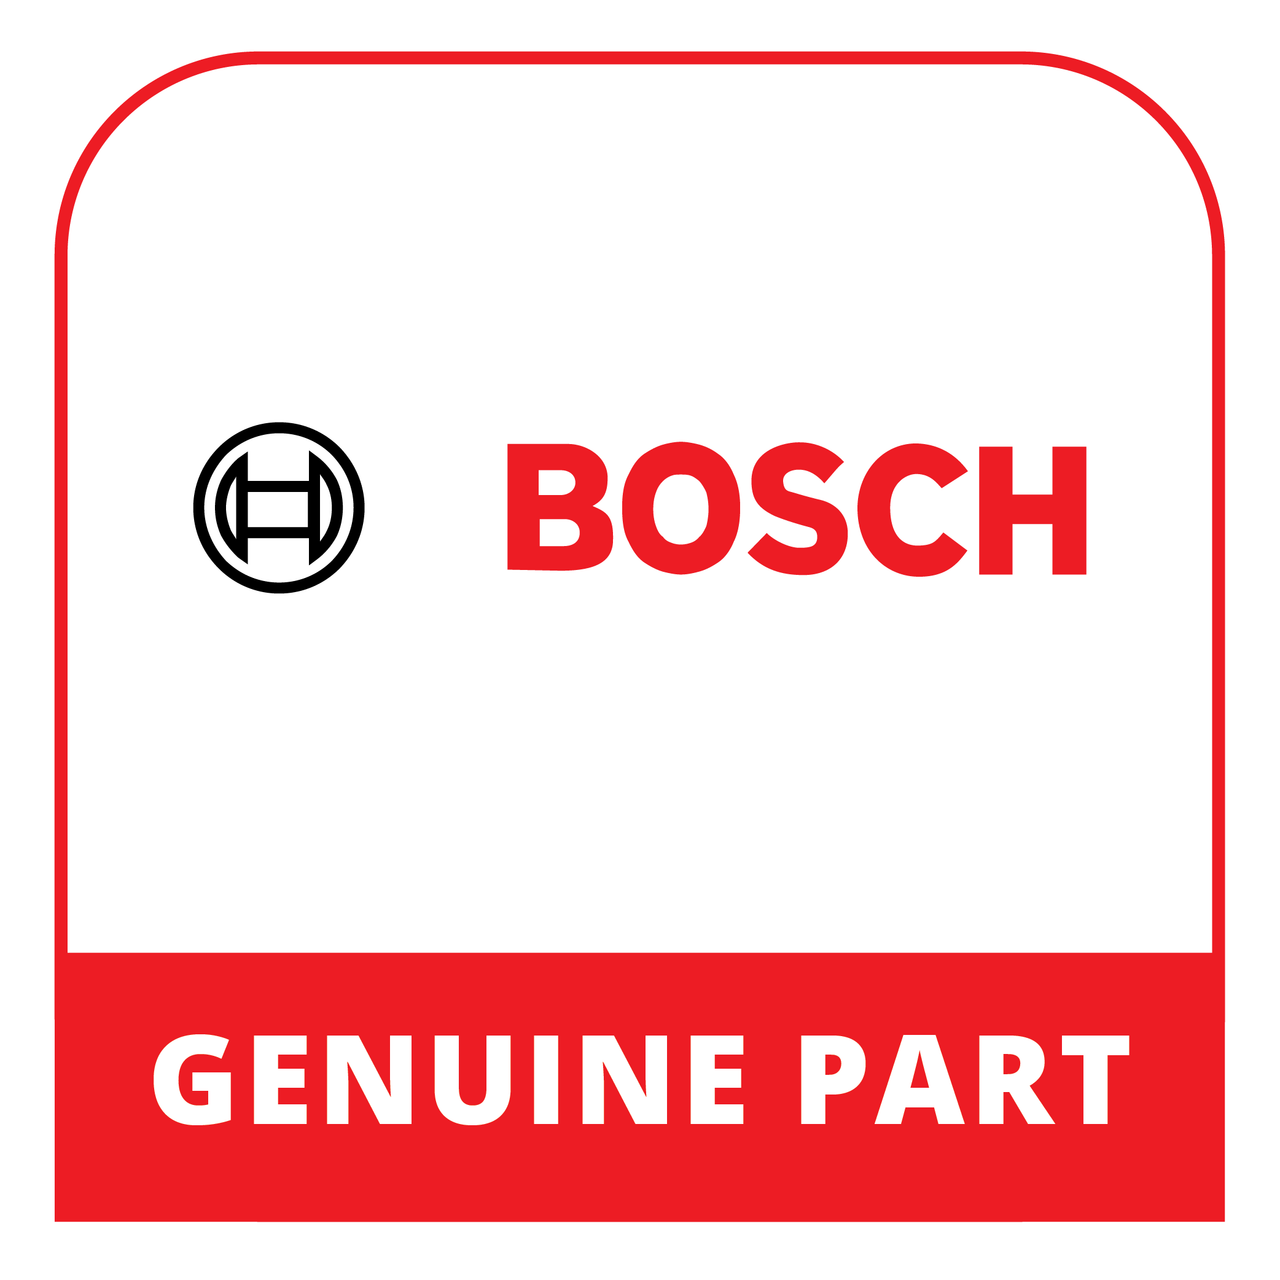 Bosch (Thermador) 10001202 - Knob-Programme - Genuine Bosch (Thermador) Part